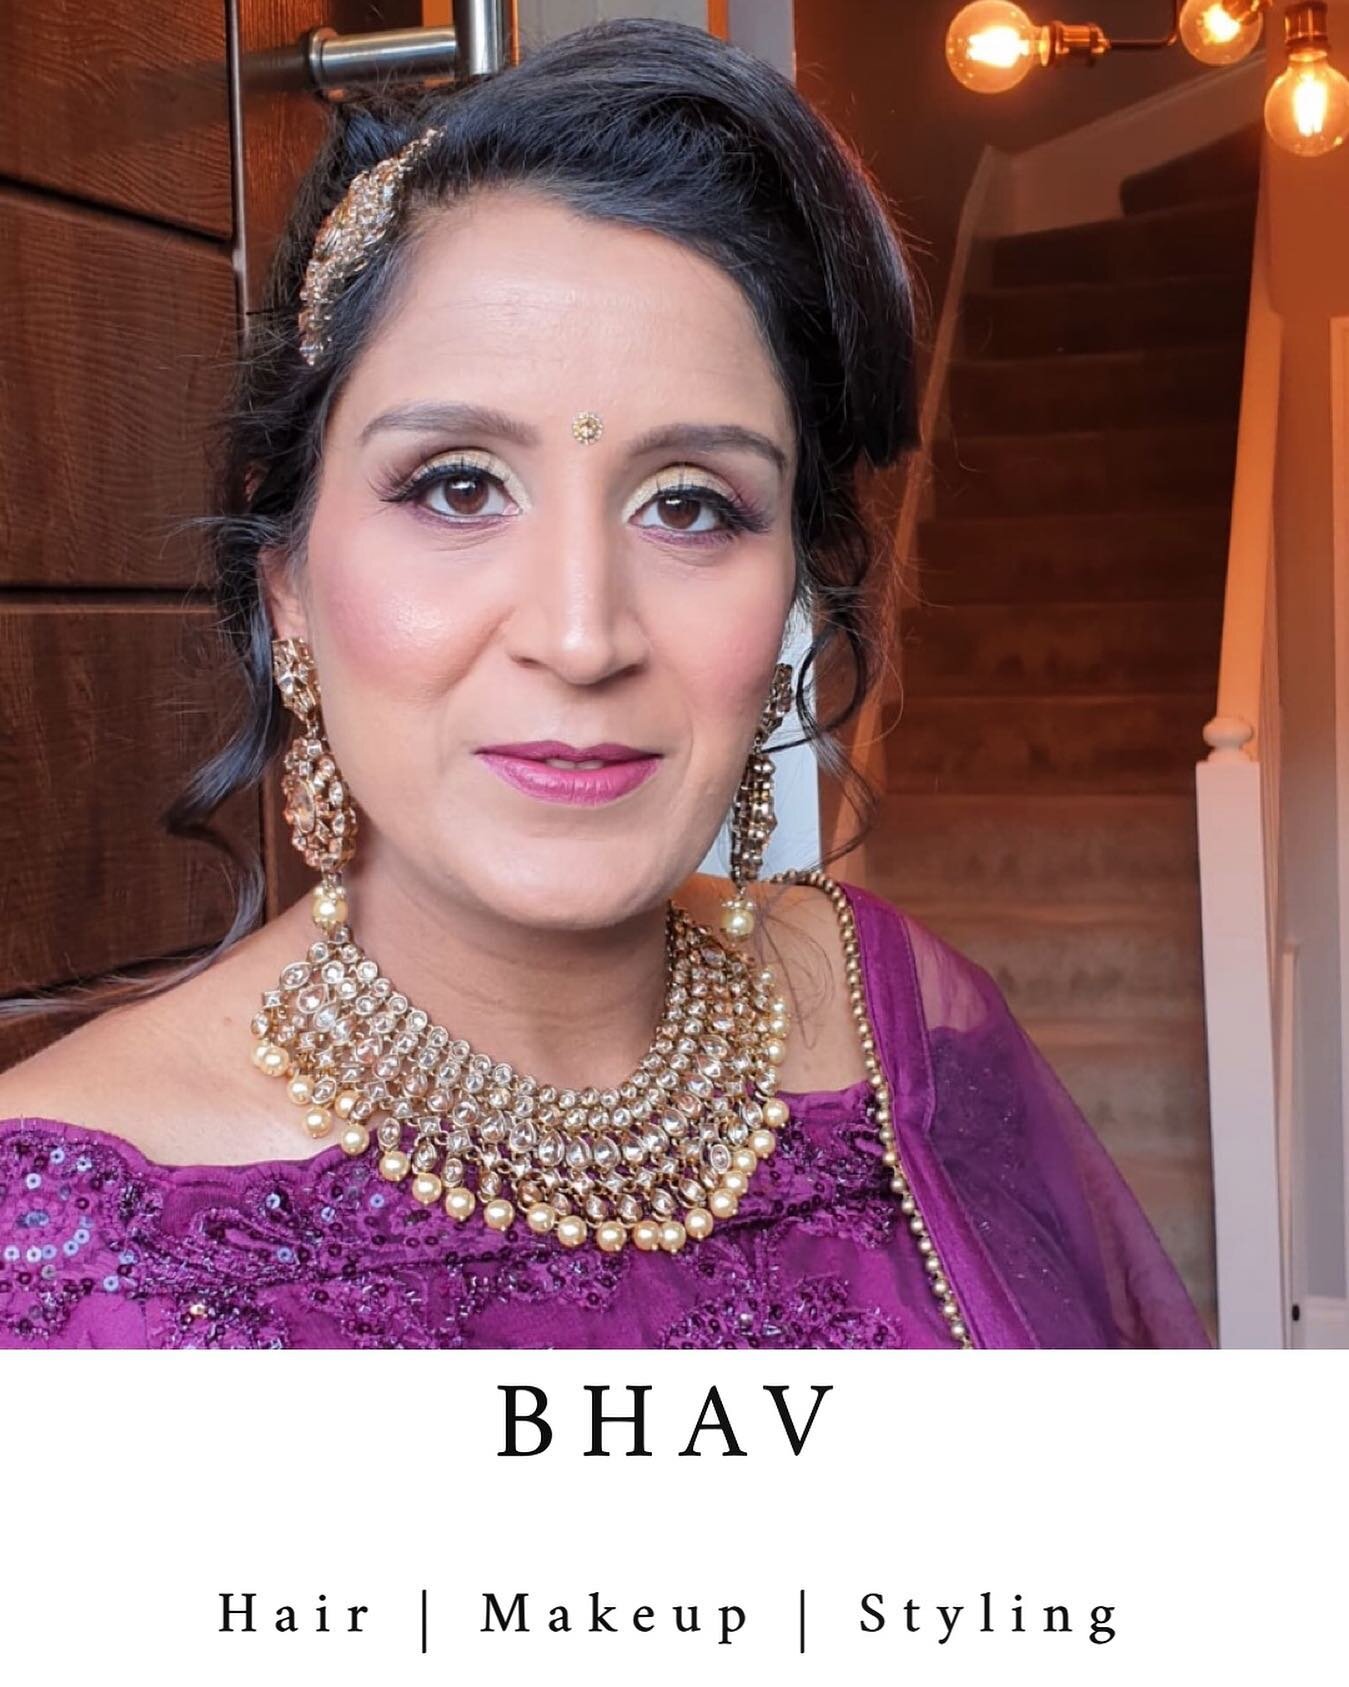 💄Senior Stylist: BHAV	
📍Location: W. LONDON - available to travel ----------------------------------------------------------------------------------	
To BOOK 👉🏽 Email us at promakeuplondonstylists@gmail.com ---------------------------------------